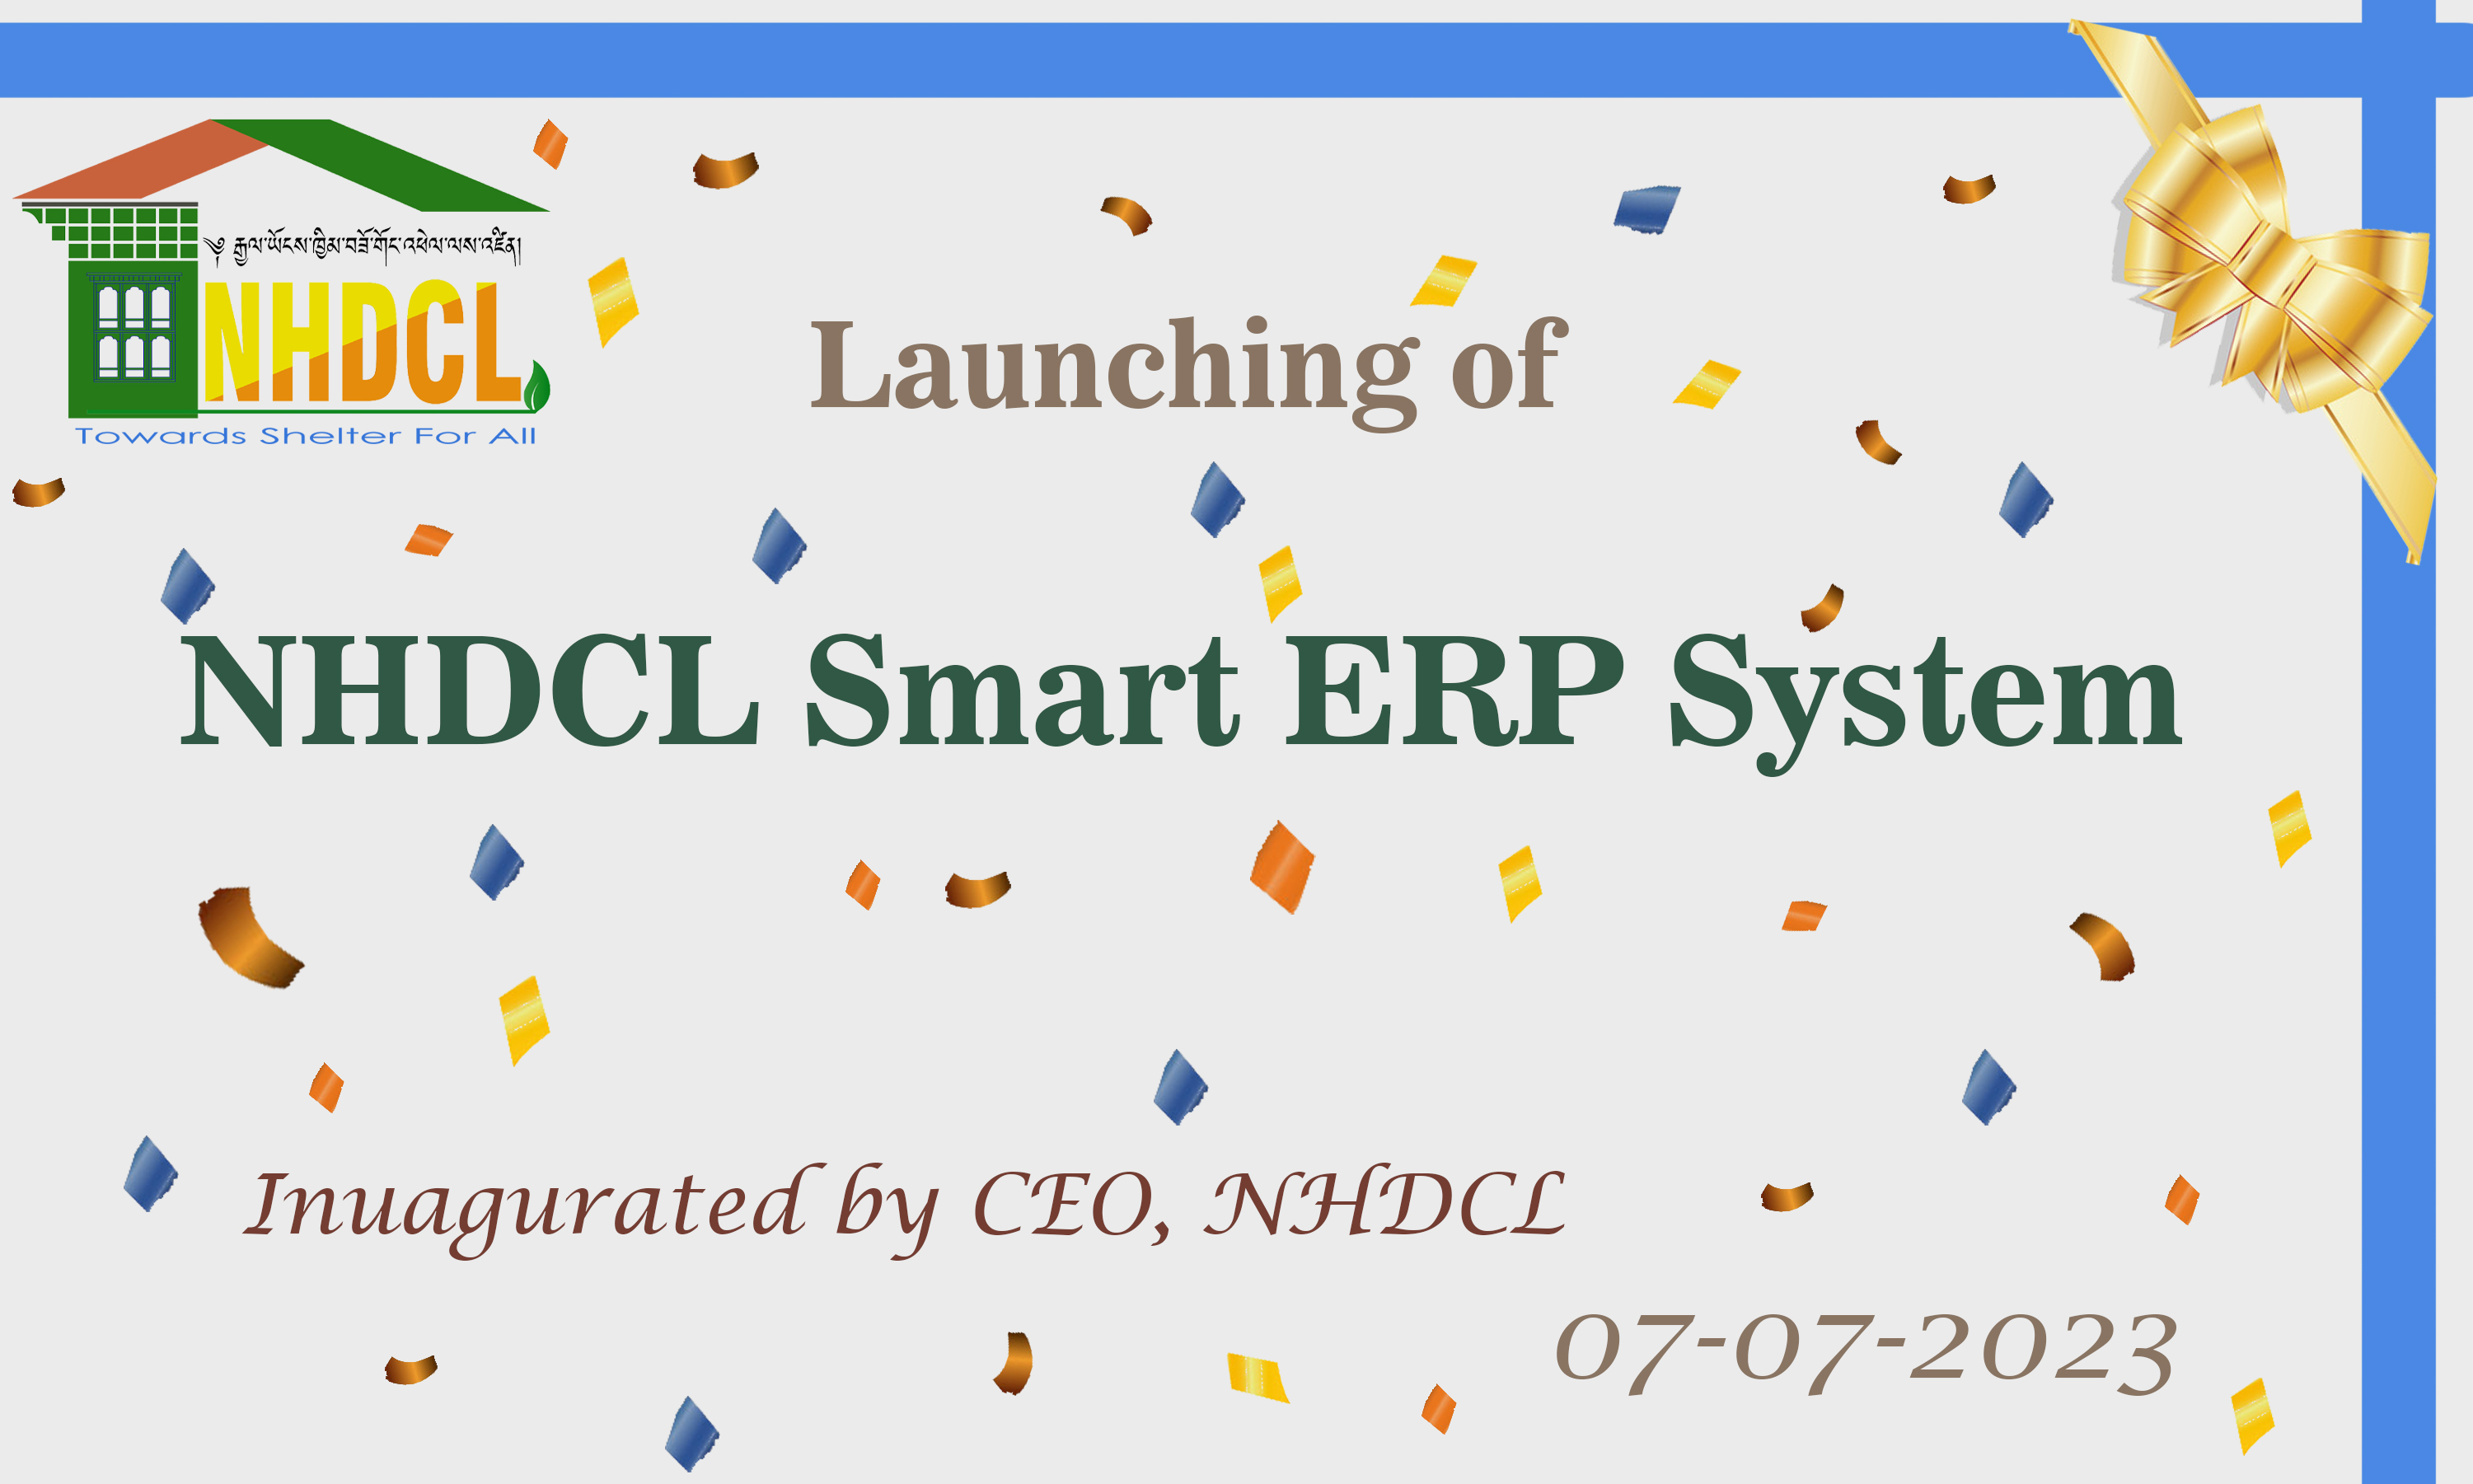 NHDCL launched and upgraded to new Smart ERP system